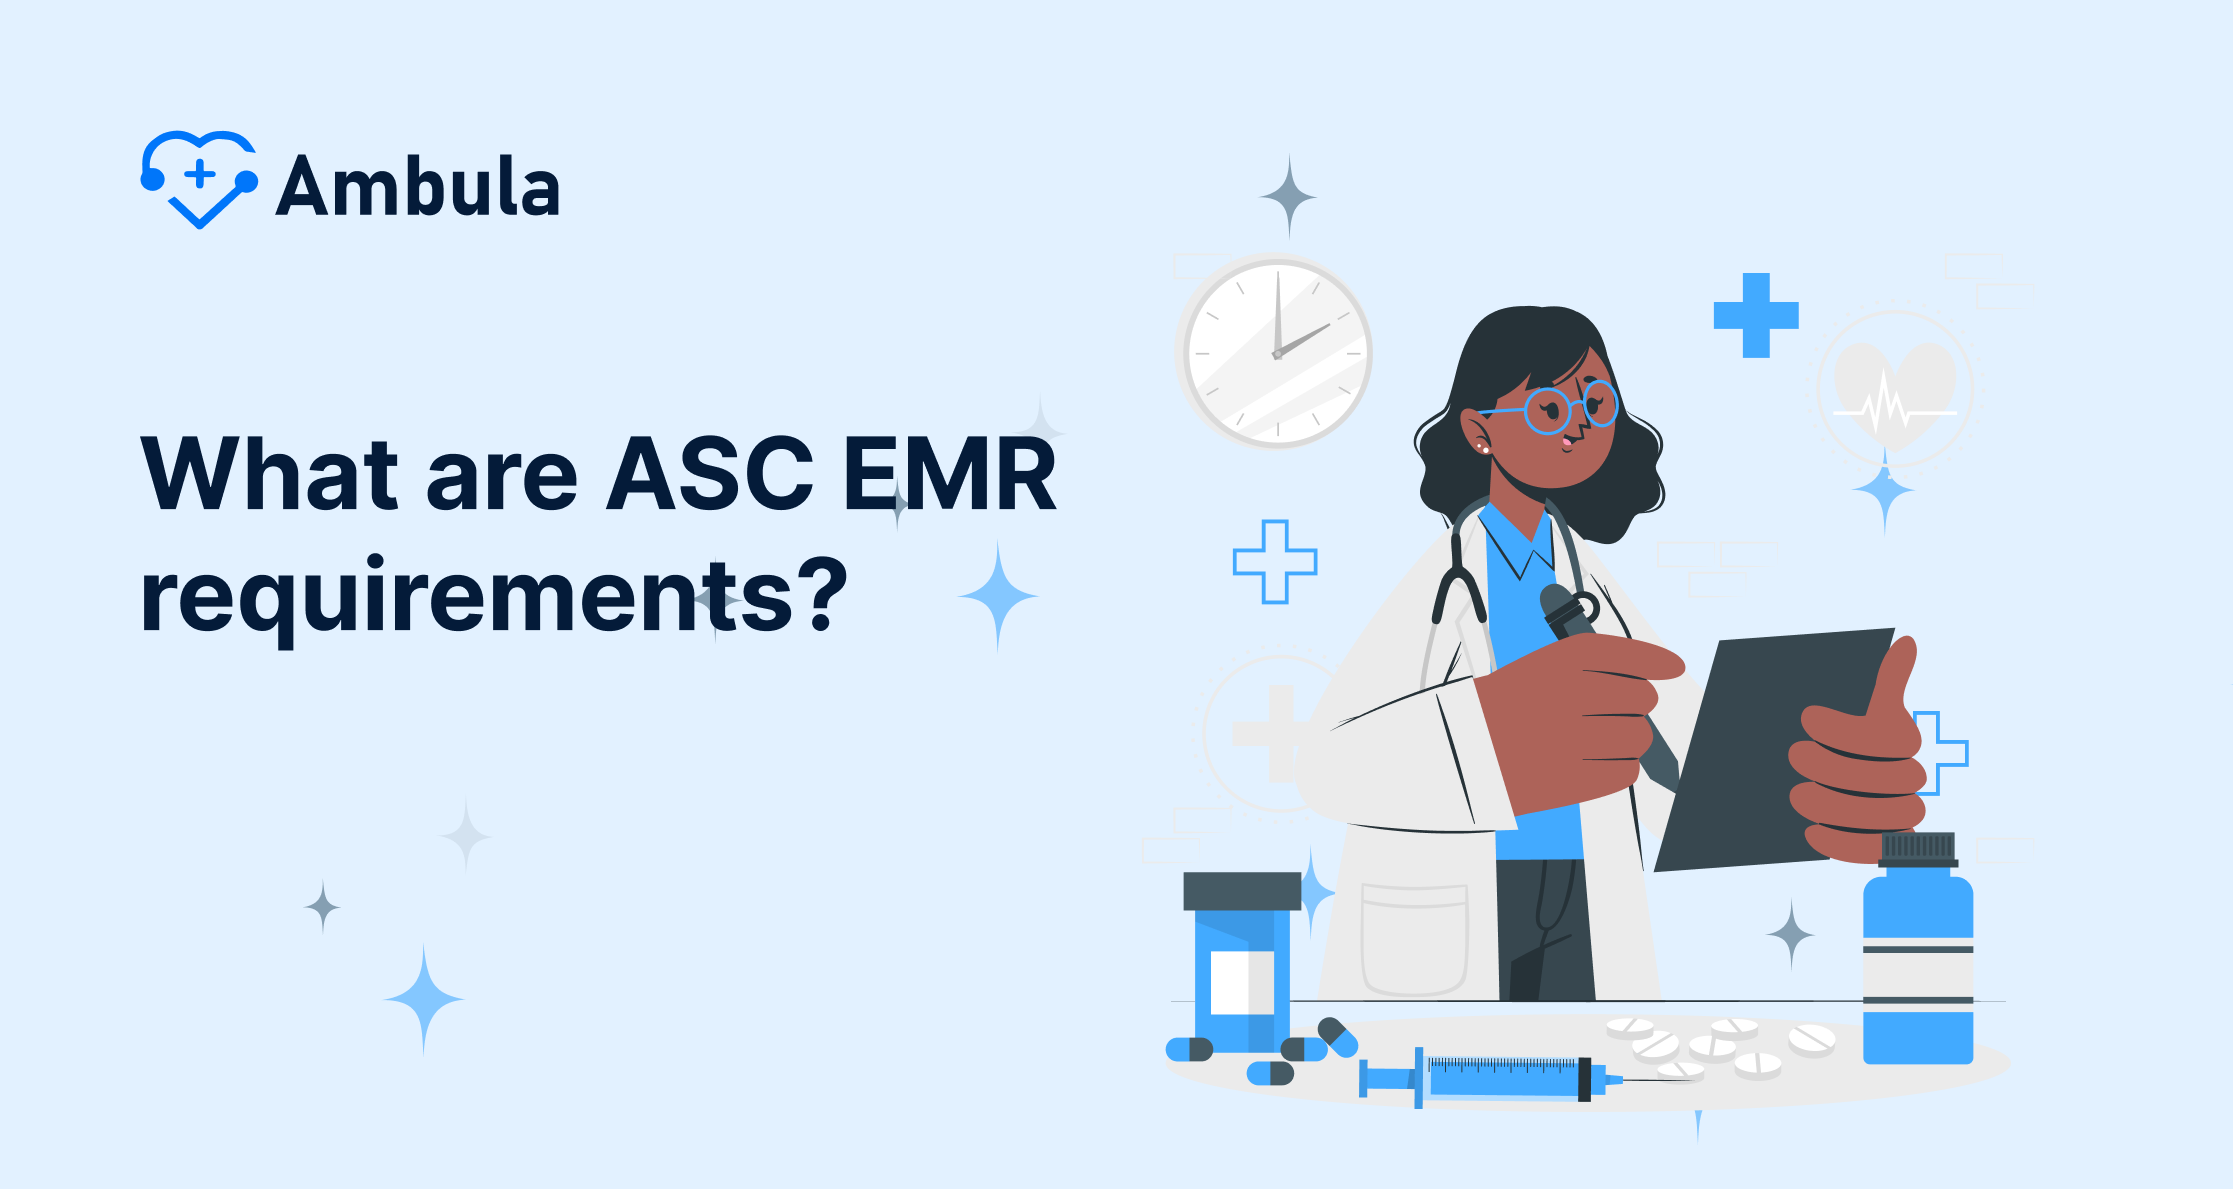 What are ASC EMR requirements?